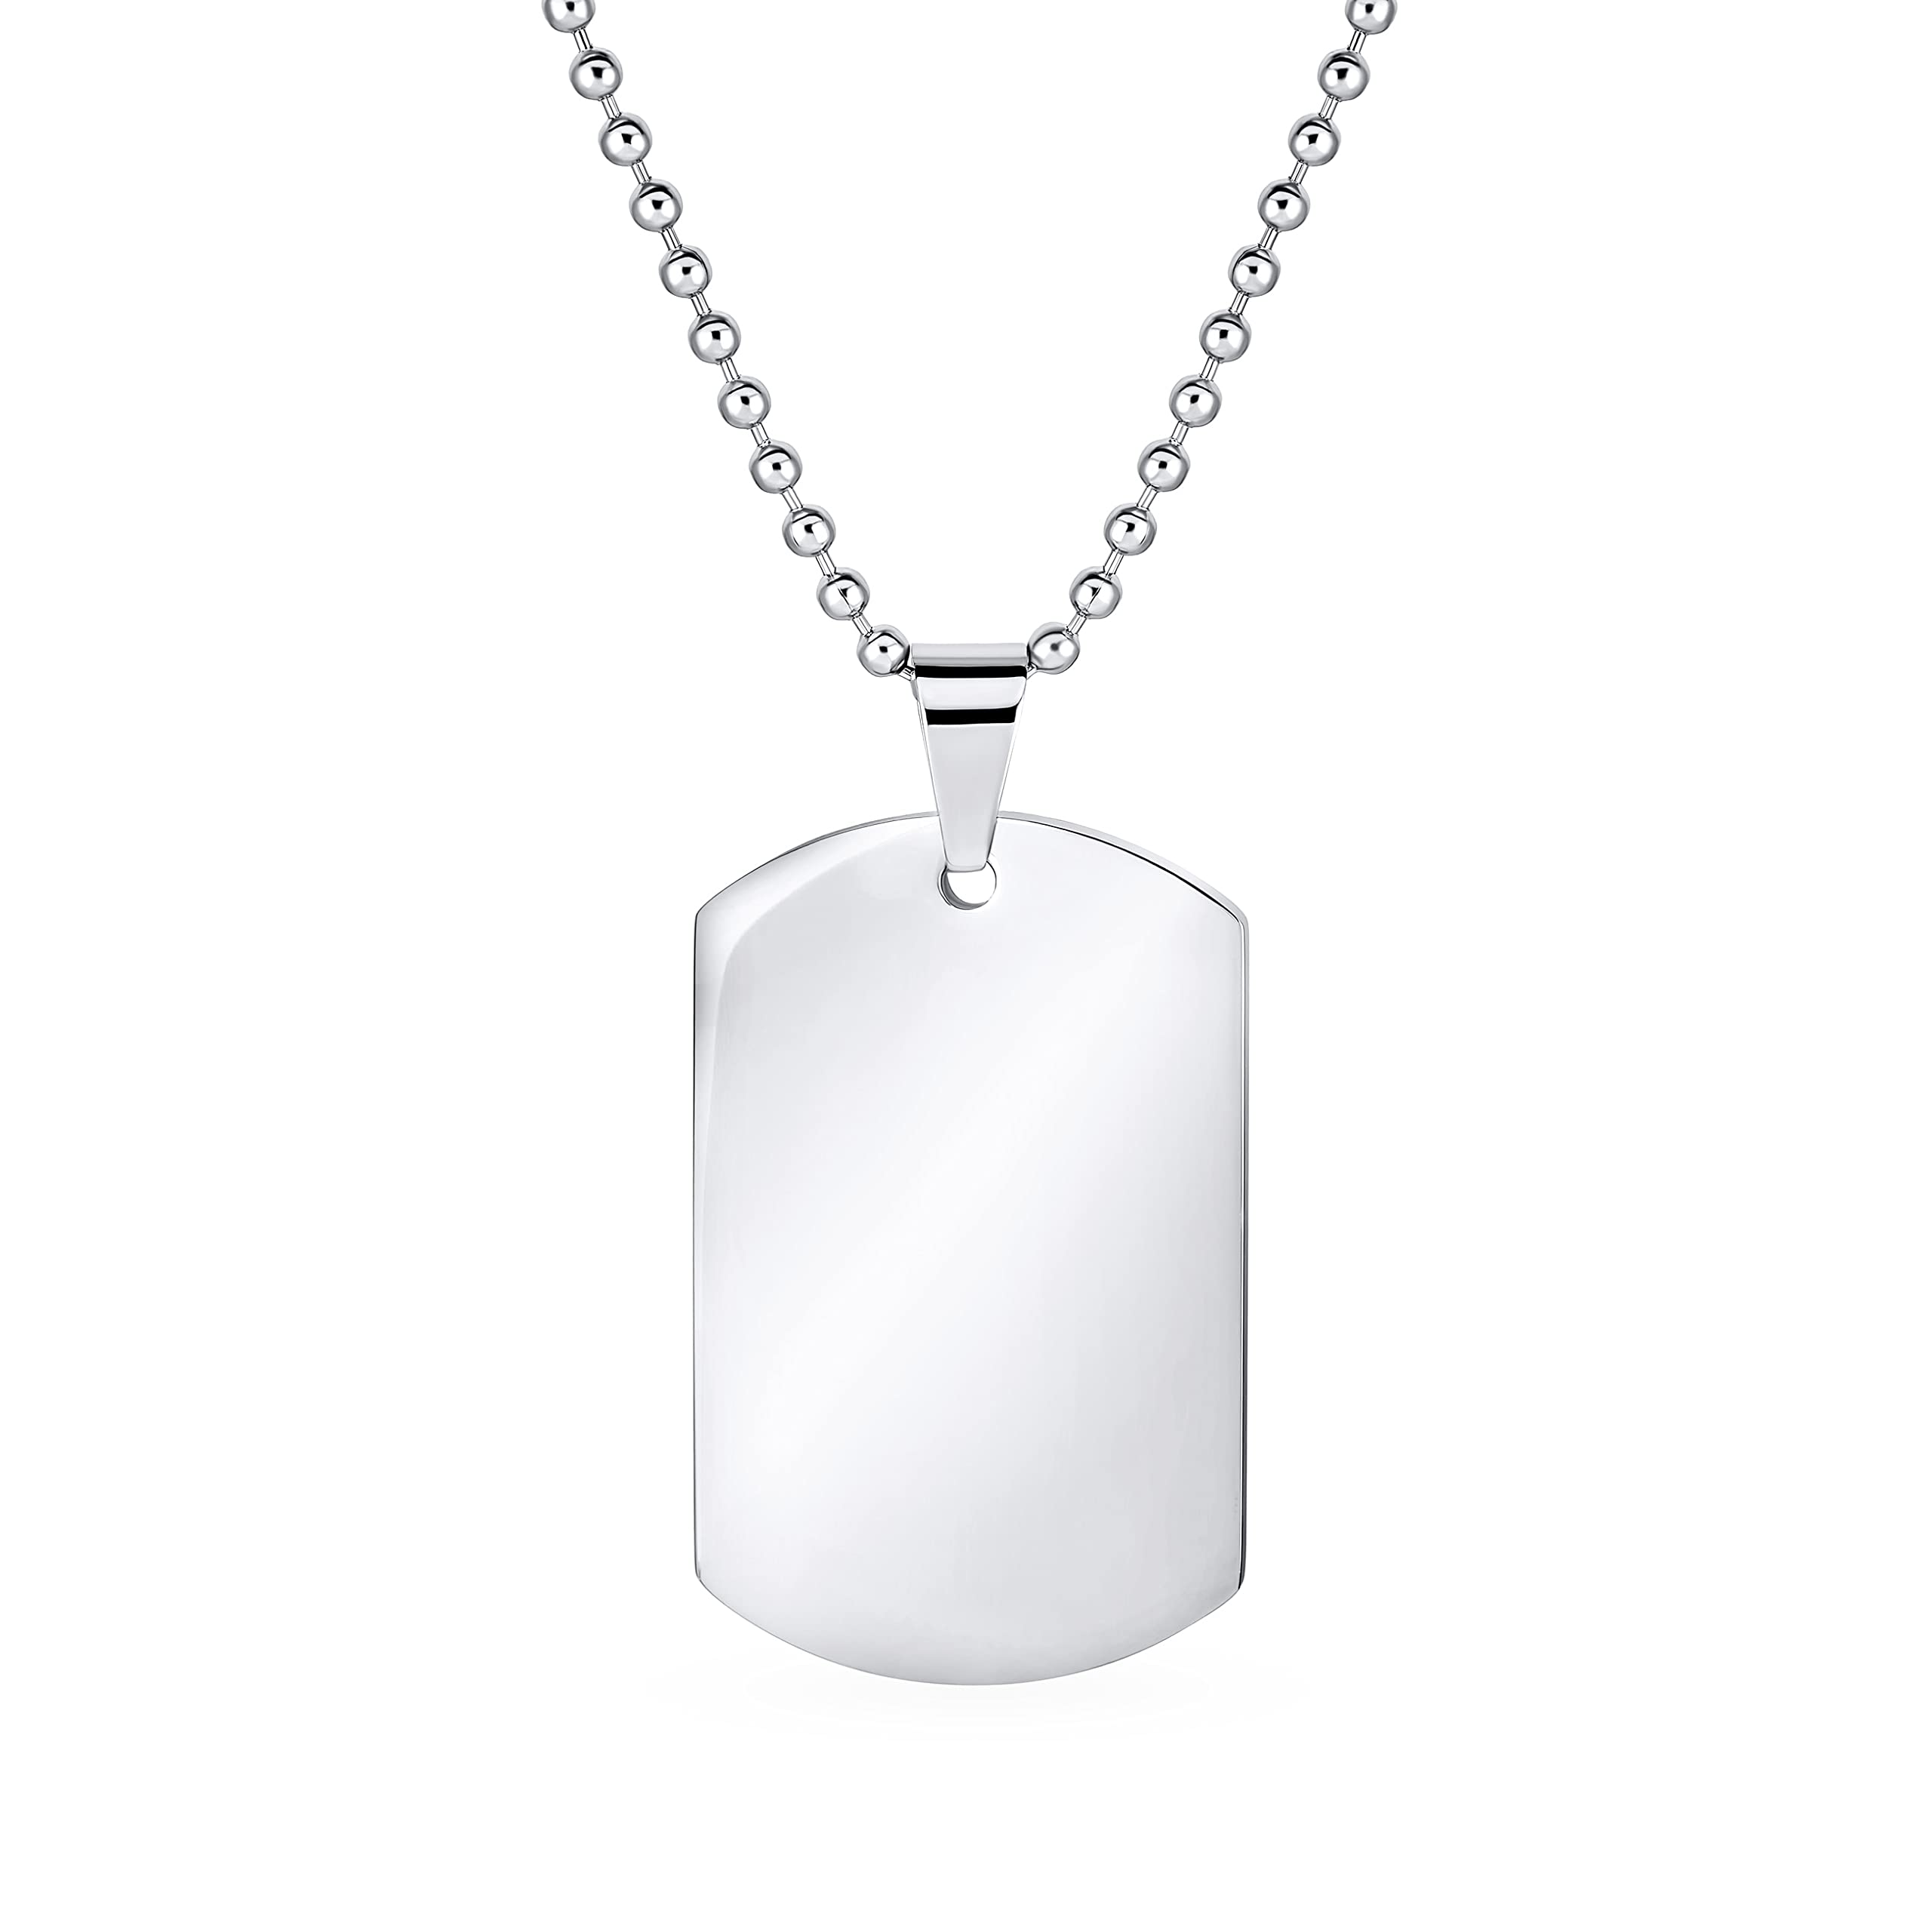 Personalized X-Large Plain Simple Basic Cool Men's Identification Military Army Dog Tag Pendant Necklace For Men Teens Polished Black Gold Silver Tone Stainless Steel 24 Inch Ball Chain Customizable